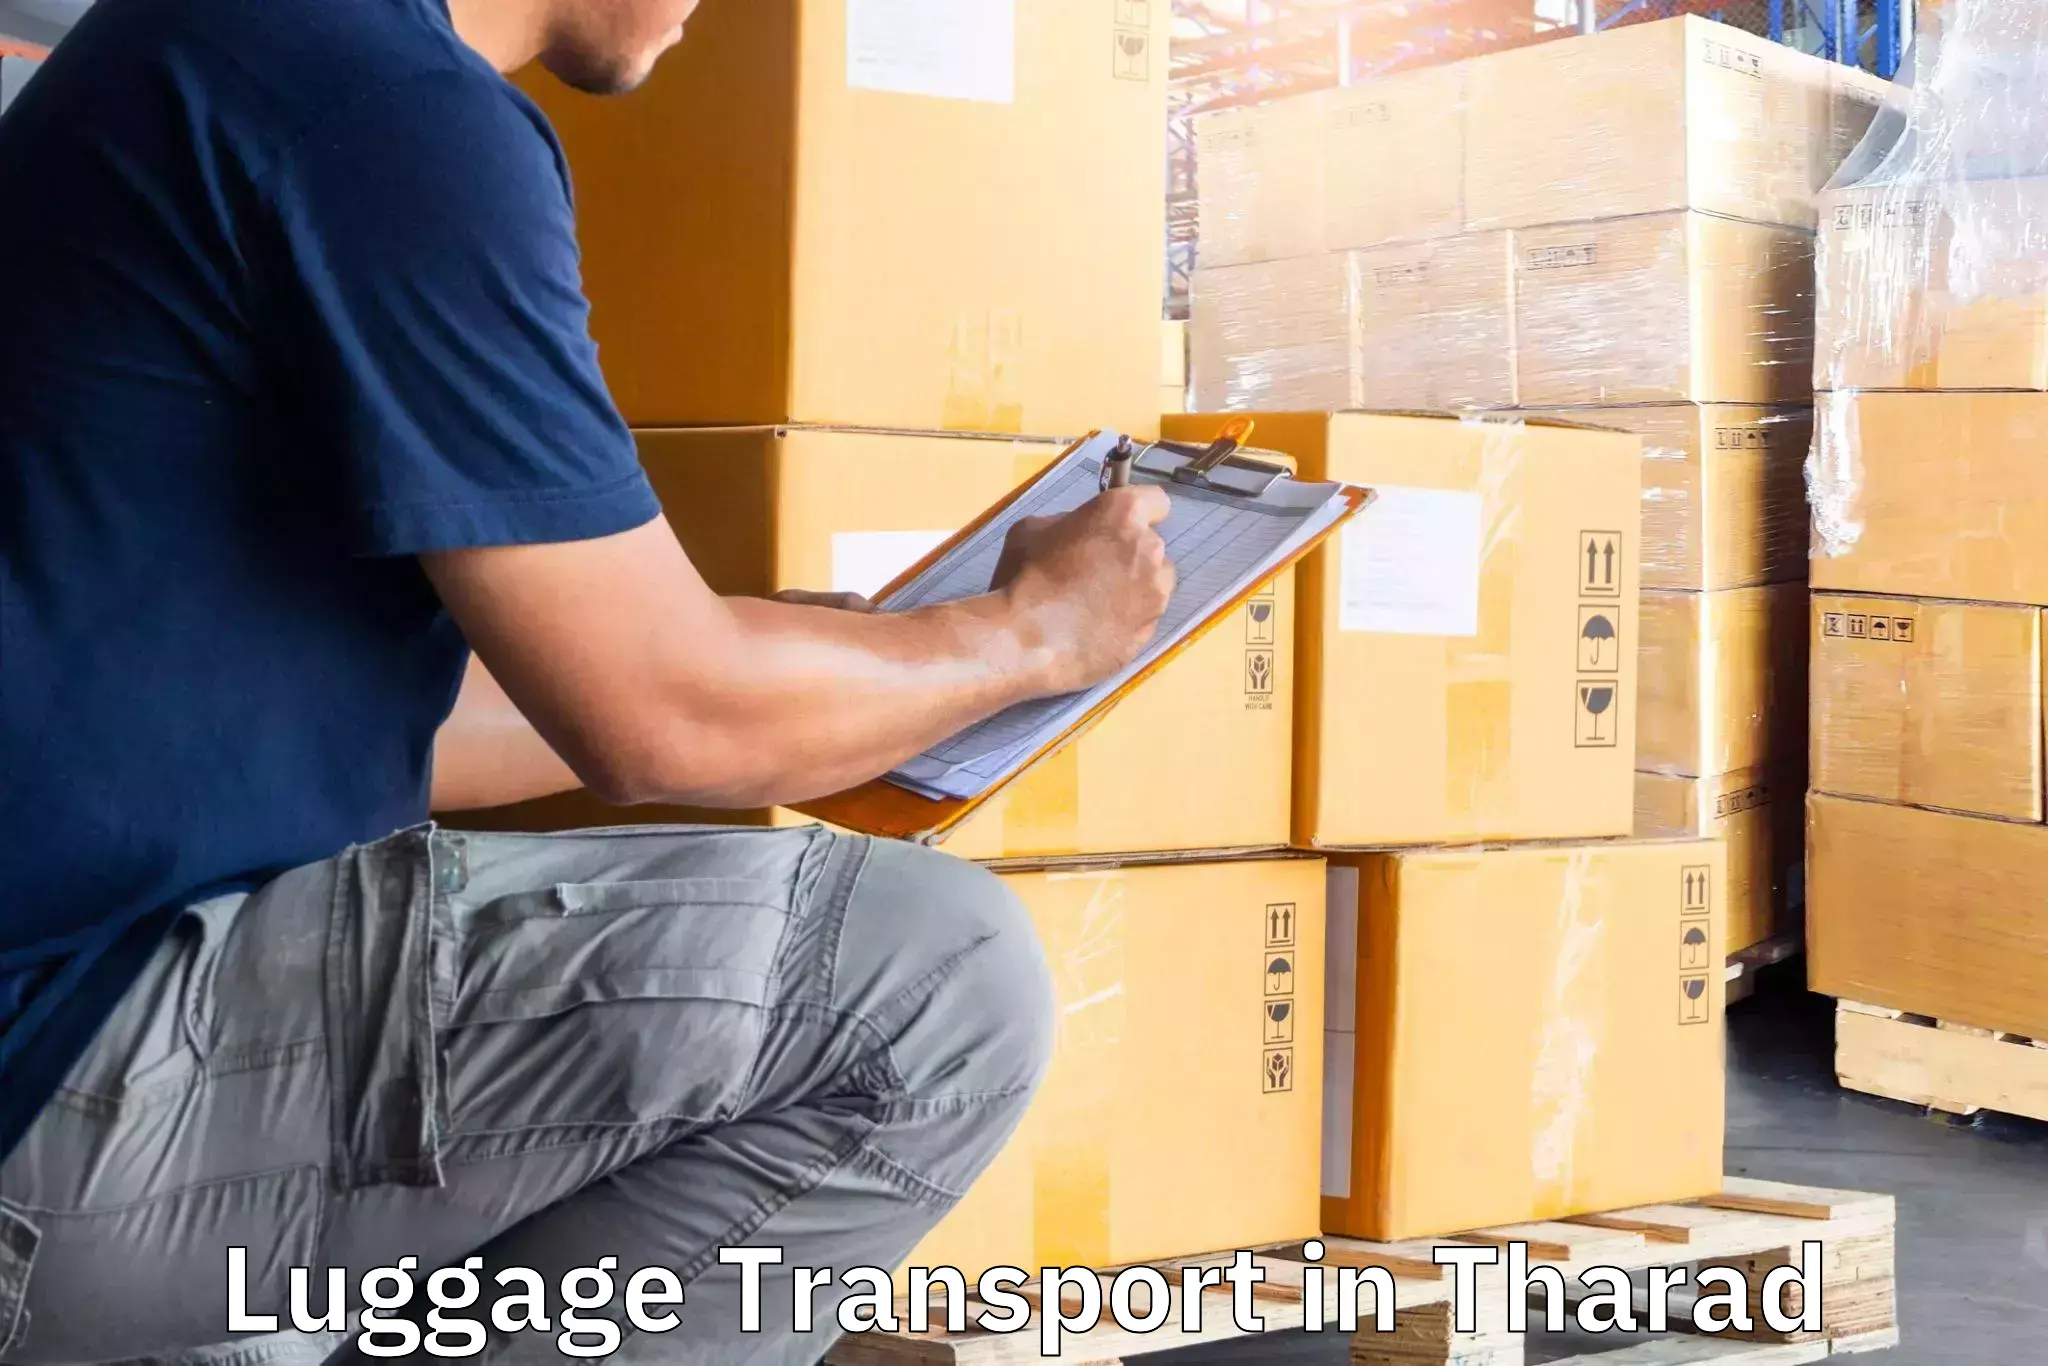 Luggage shipping efficiency in Tharad